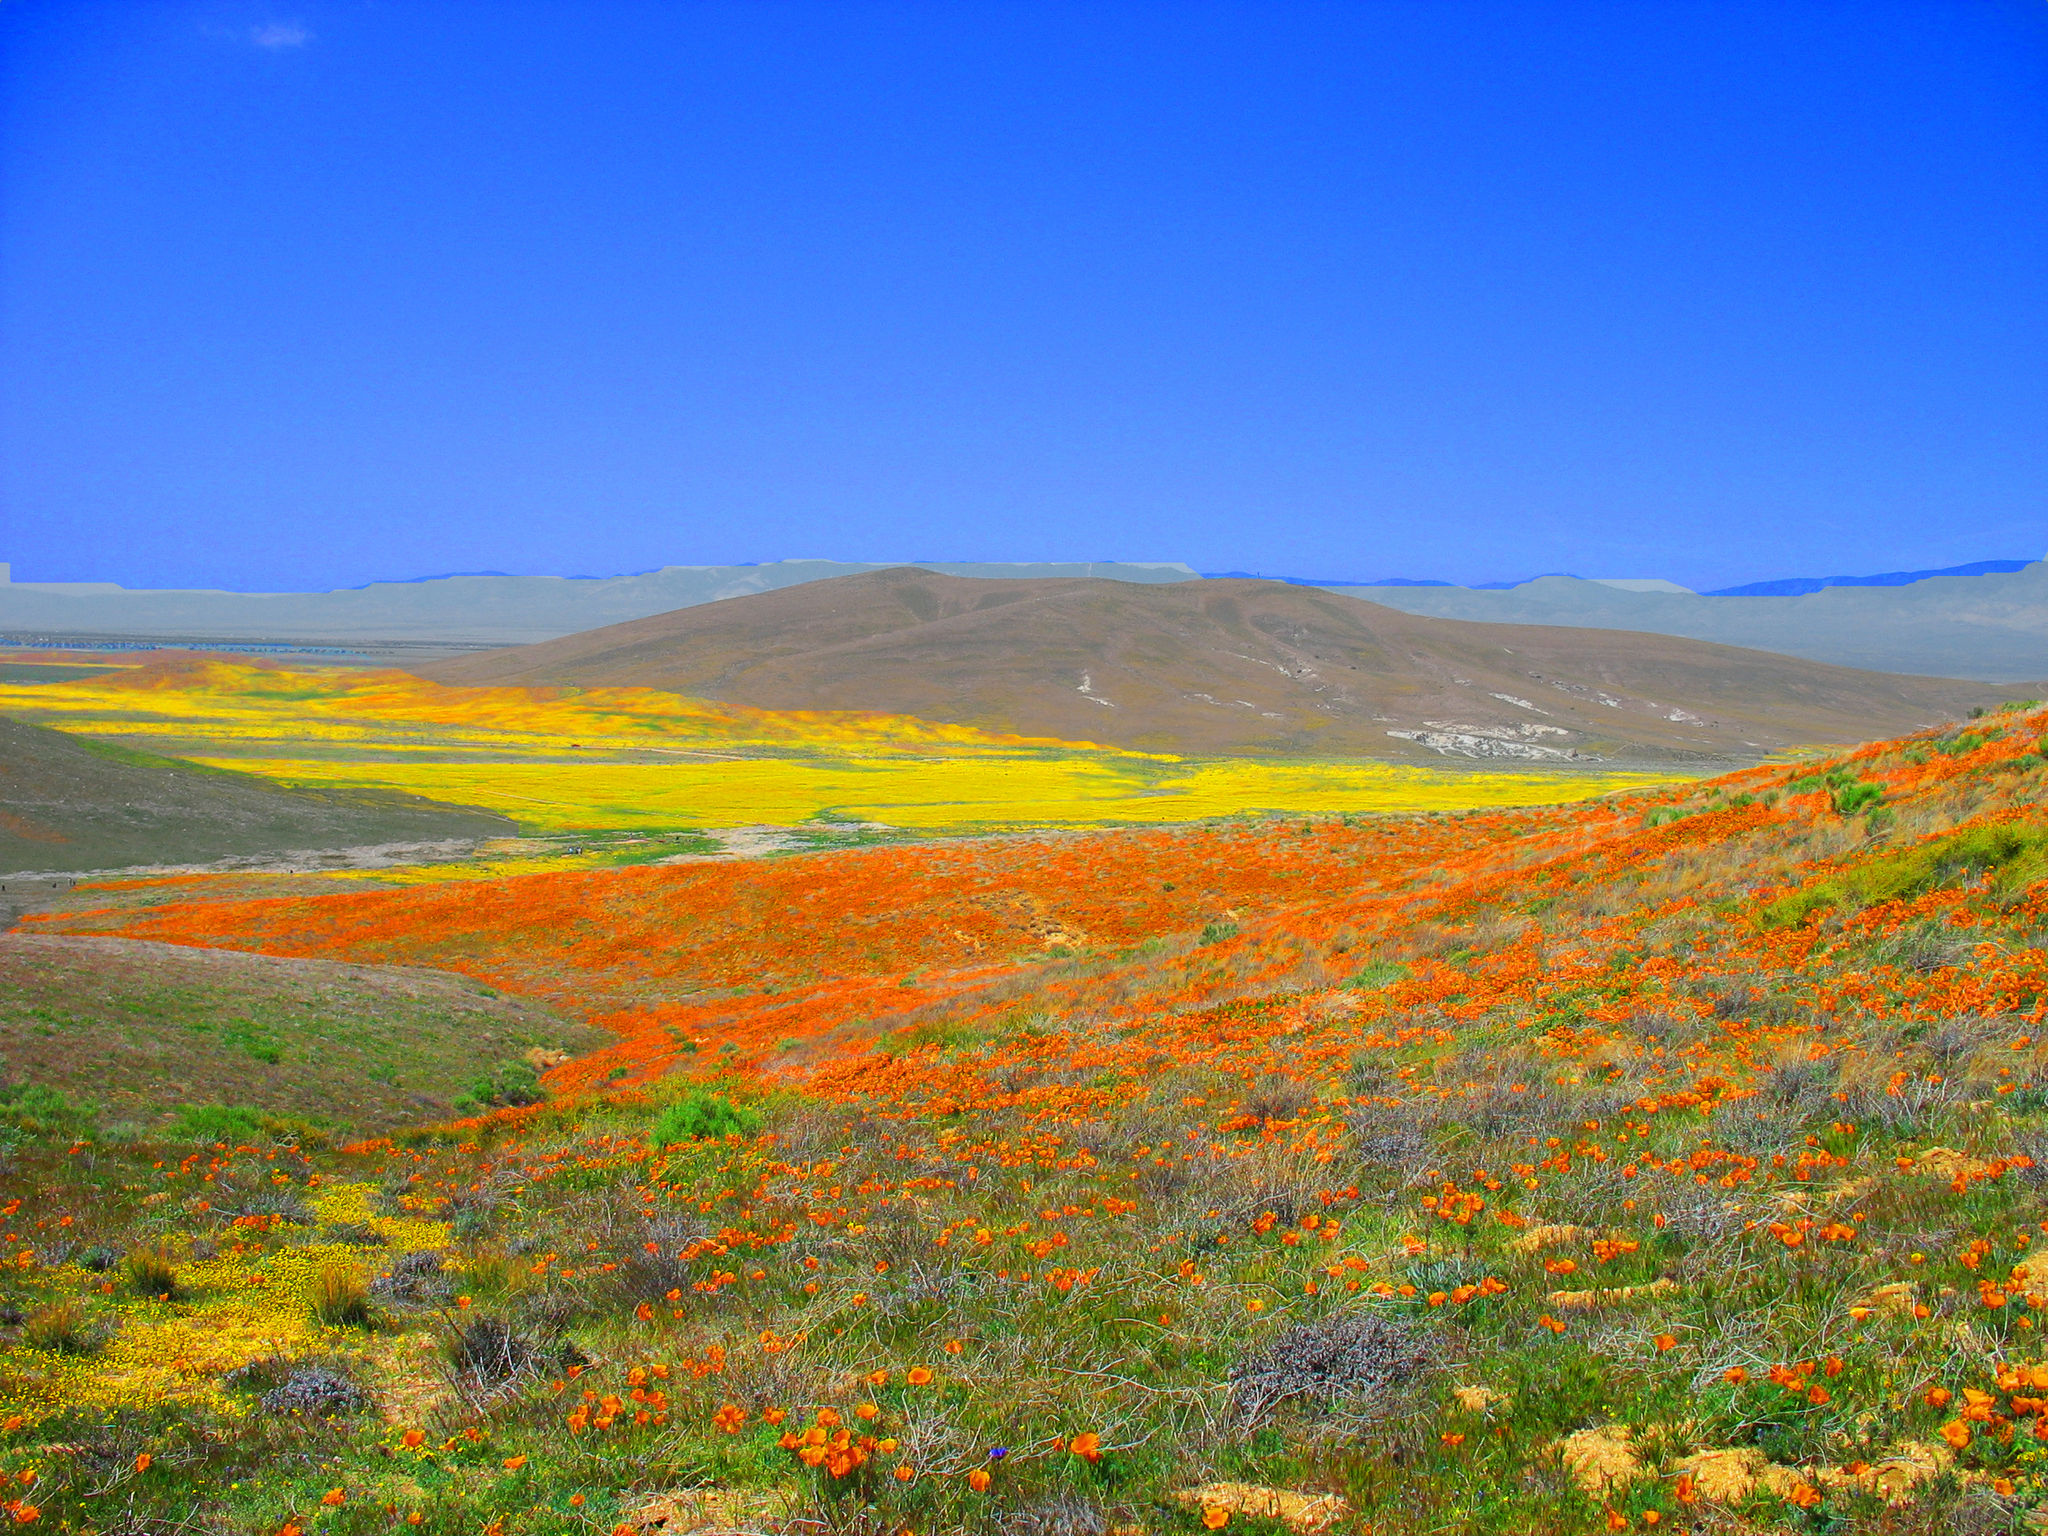 Wild flowers light up the Antelope Valley